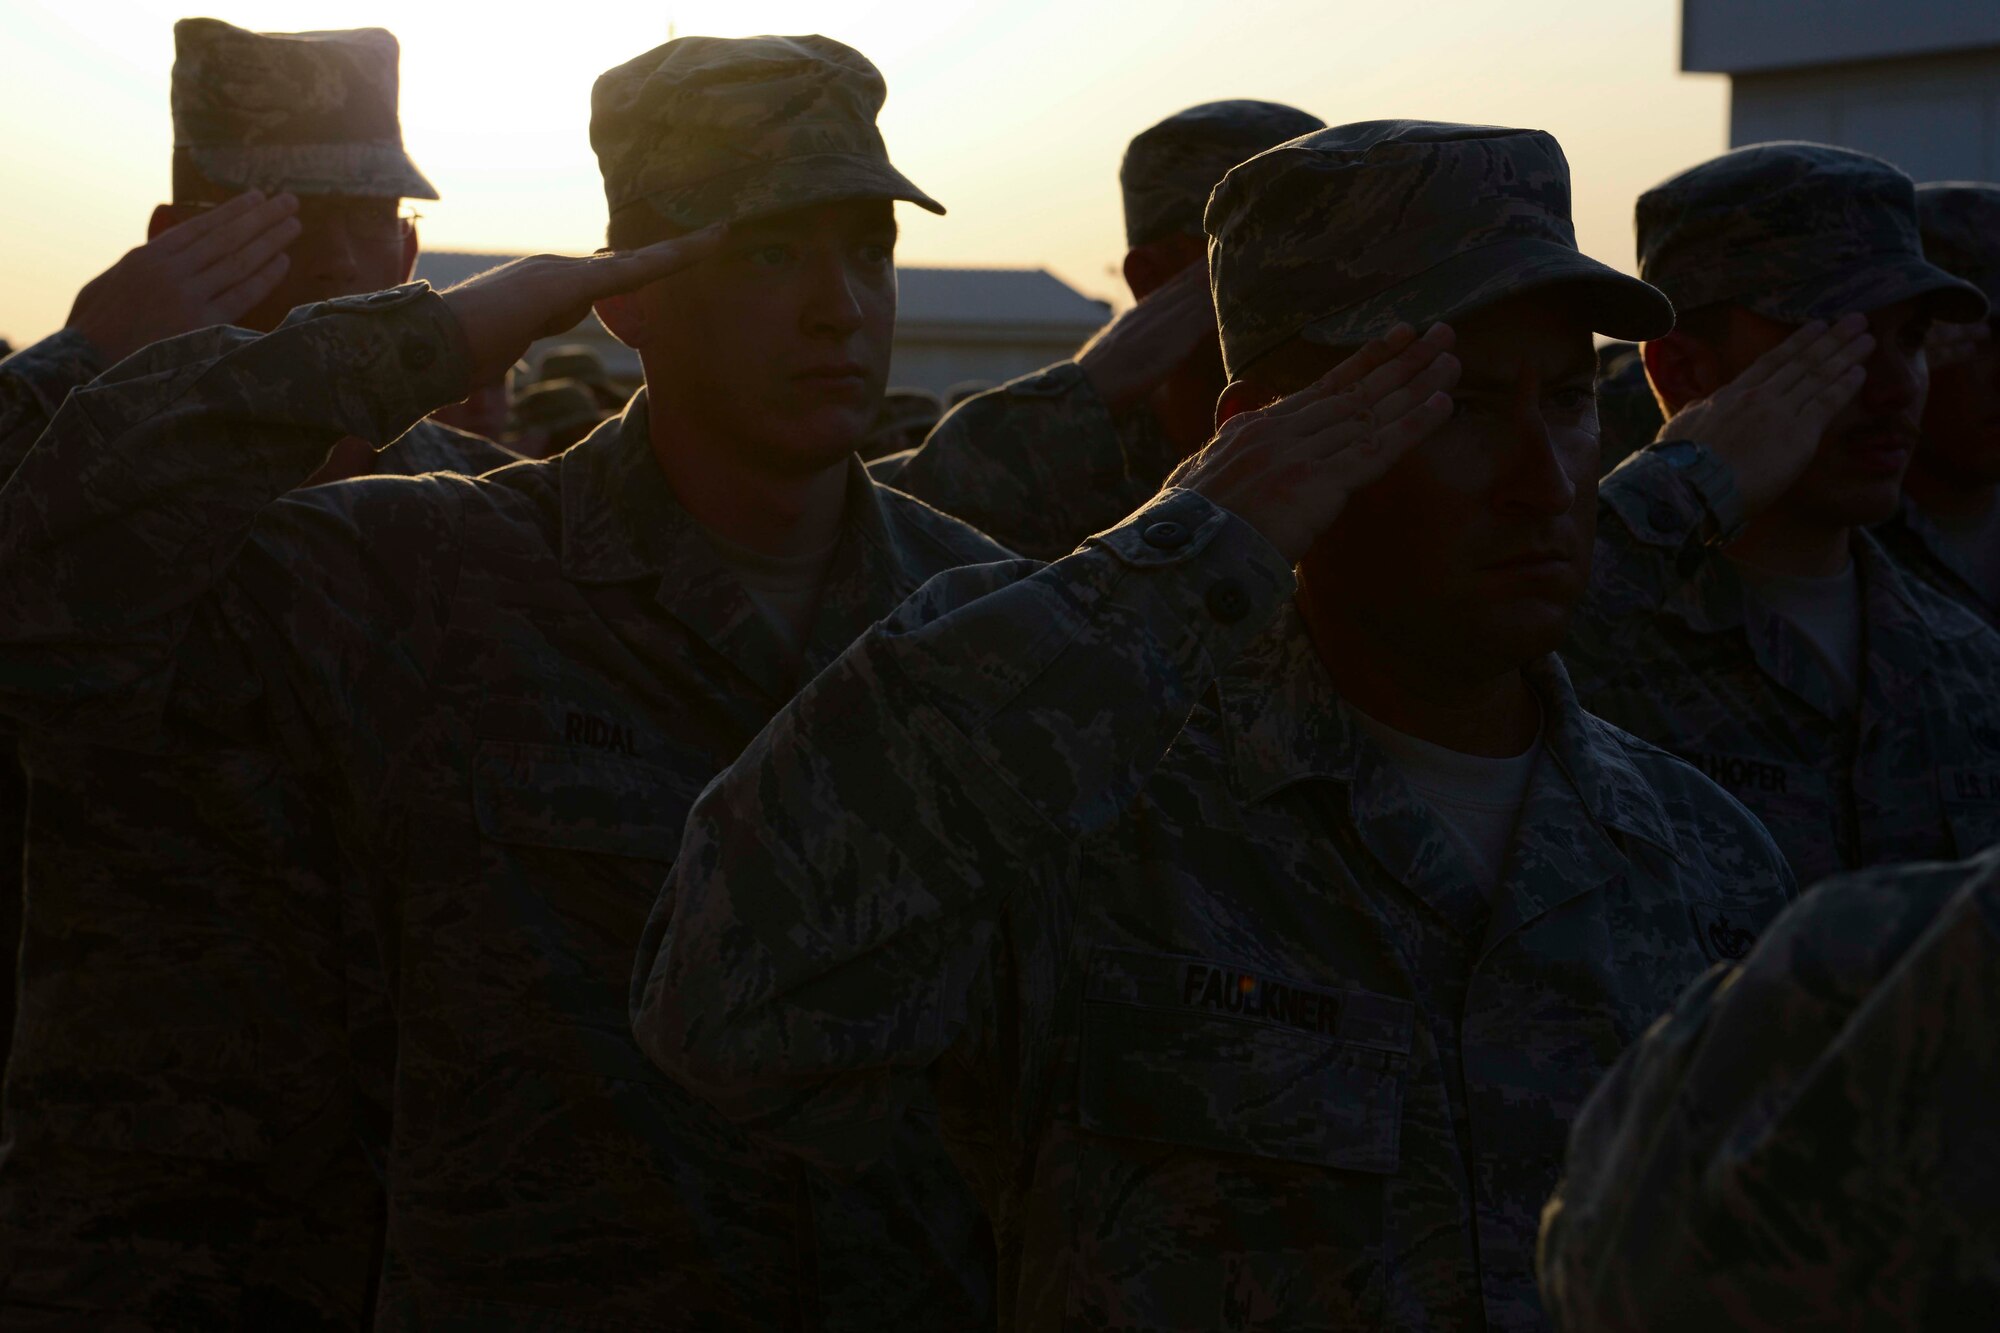 U.S. Air Force Airmen salute during a retreat ceremony in honor of the thirteenth anniversary of Sept. 11, 2001, at Al Udeid Air Base, Qatar, Sept. 11, 2014. The event was held to honor and remember those who lost their lives on that day more than a decade ago. (U.S. Air Force photo by Staff Sgt. Ciara Wymbs)